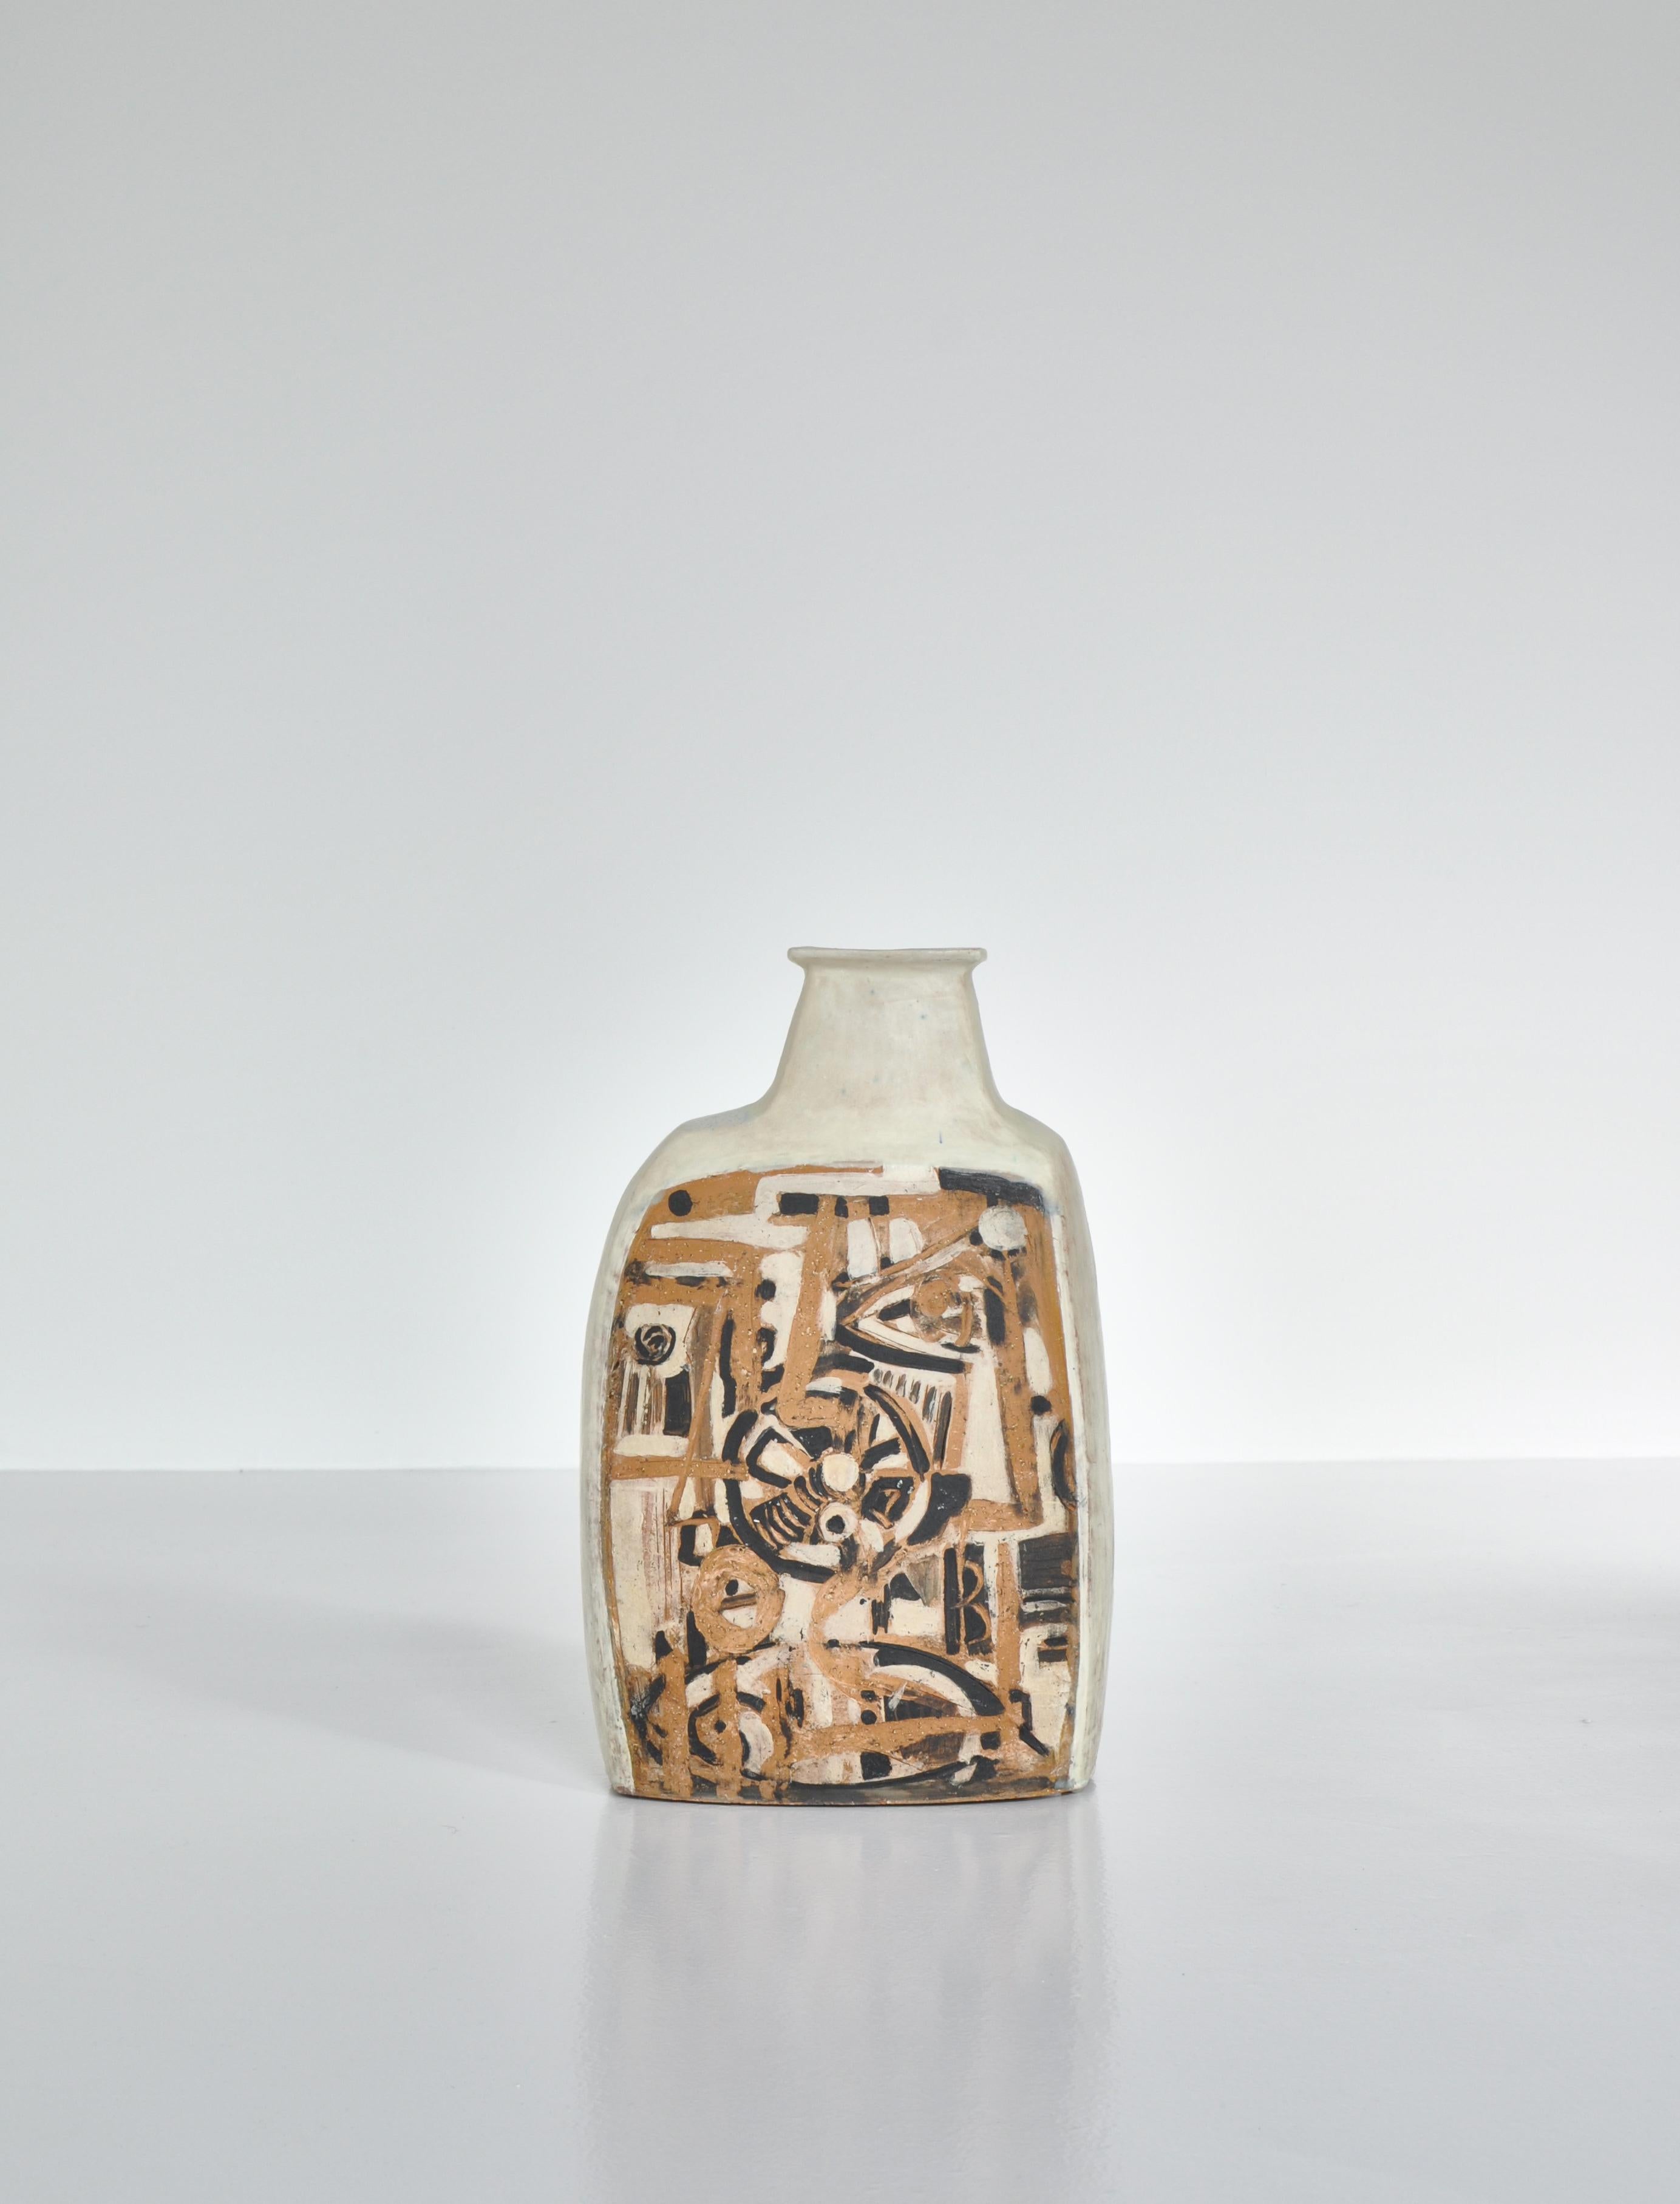 Wonderful handmade ceramics floor vase by renown Danish artist Jeppe Hagedorn-Olsen. Parts of the vase is covered with white glazing while the fronts are unglazed and decorated with various symbols and abstract forms. The vase is unique and was made